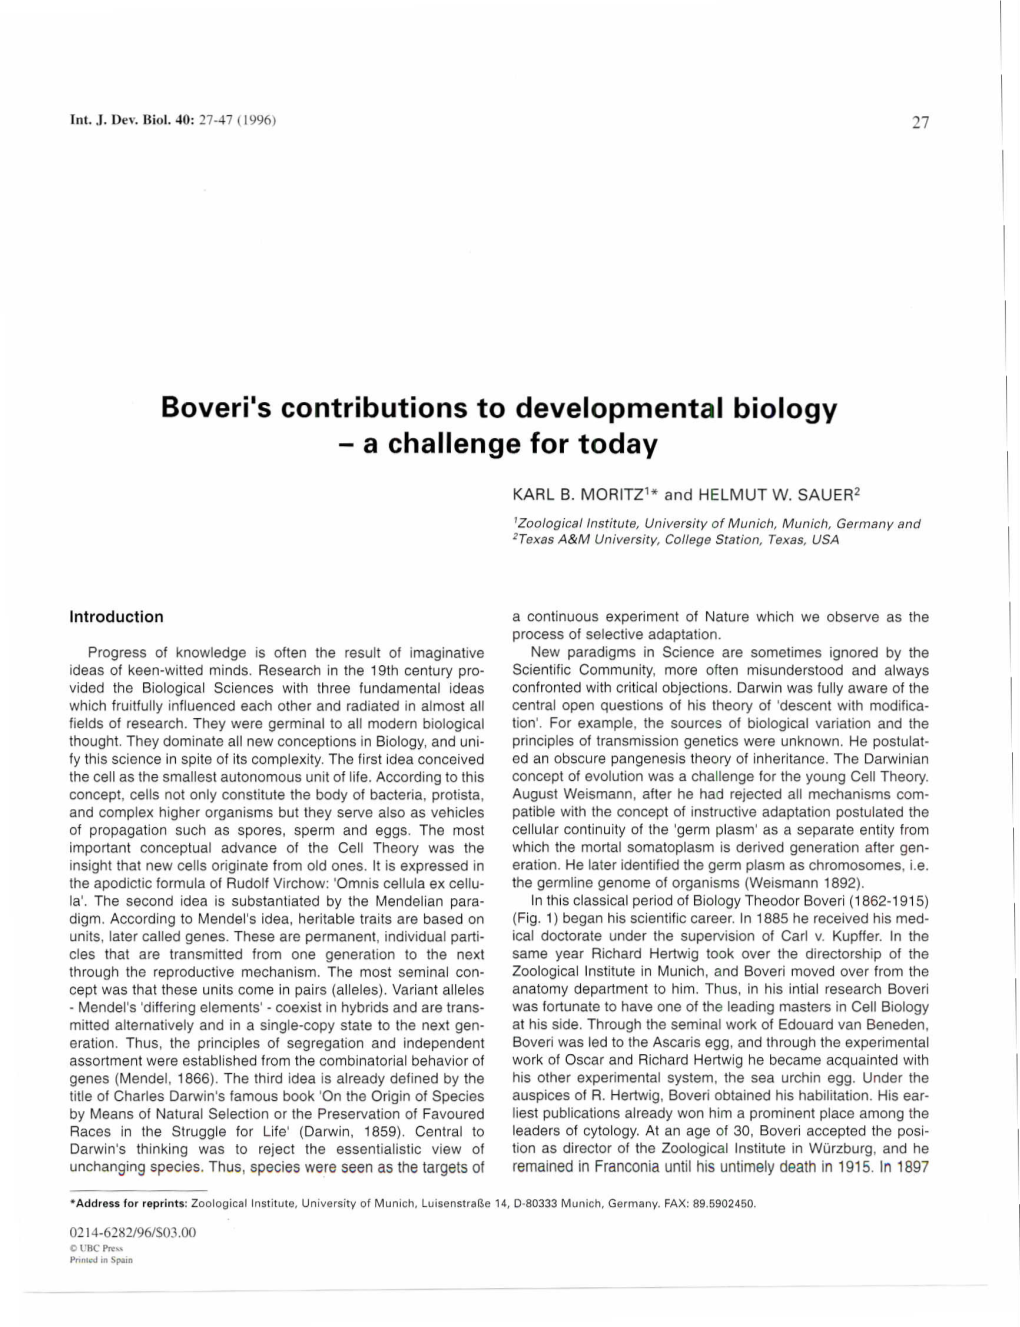 Boveri's Contributions to Developmental Biology - a Challenge for Today